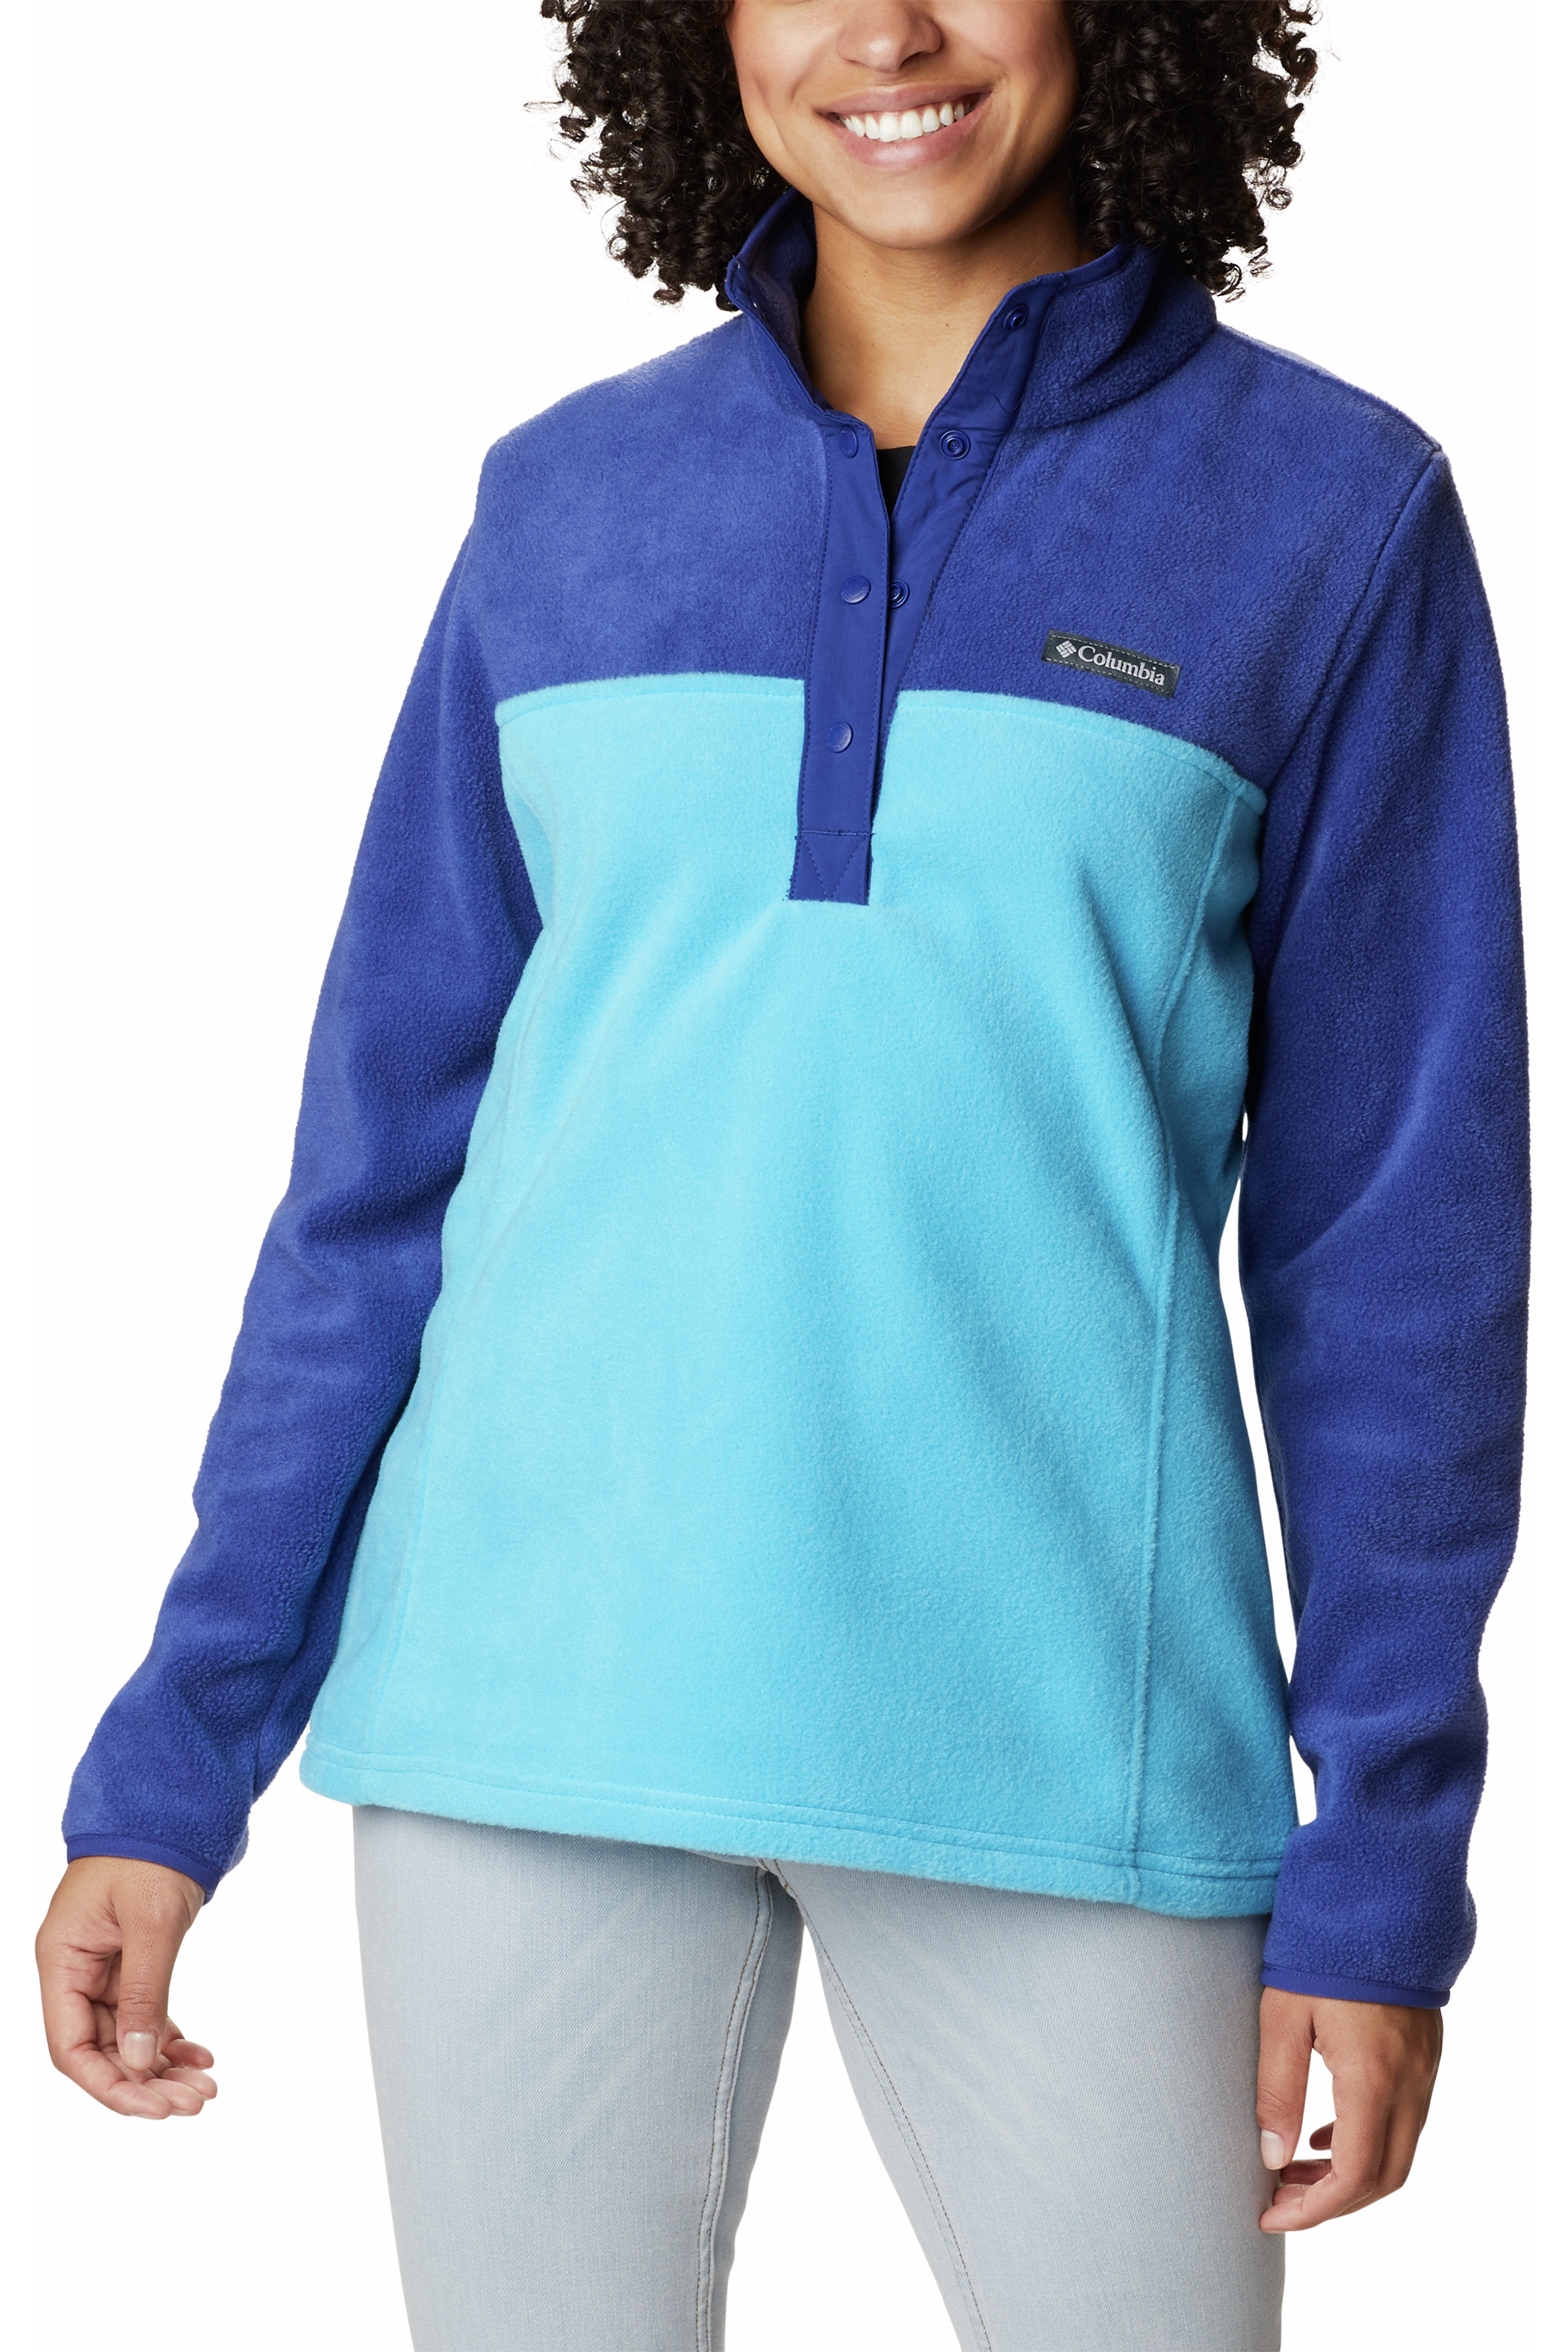 Columbia Benton Springs 1/2 Snap Pullover - Style 1860991422, front